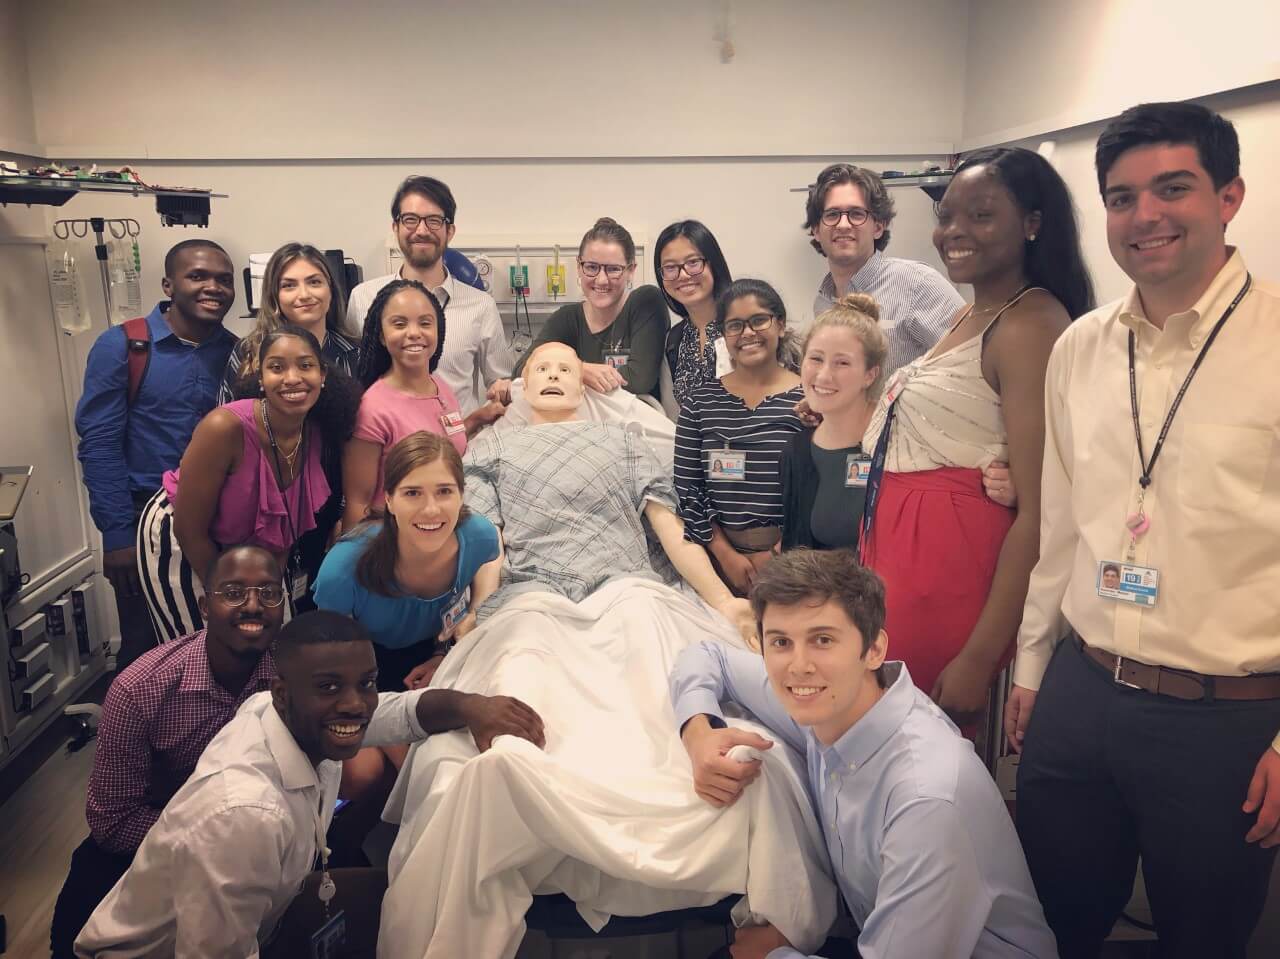 TouroCOM Middletown student Benjamin Araki (back row, third from left) participated in three studies during his internship at the The Icahn School of Medicine at Mount Sinai’s Emergency Medicine Research Training Program.